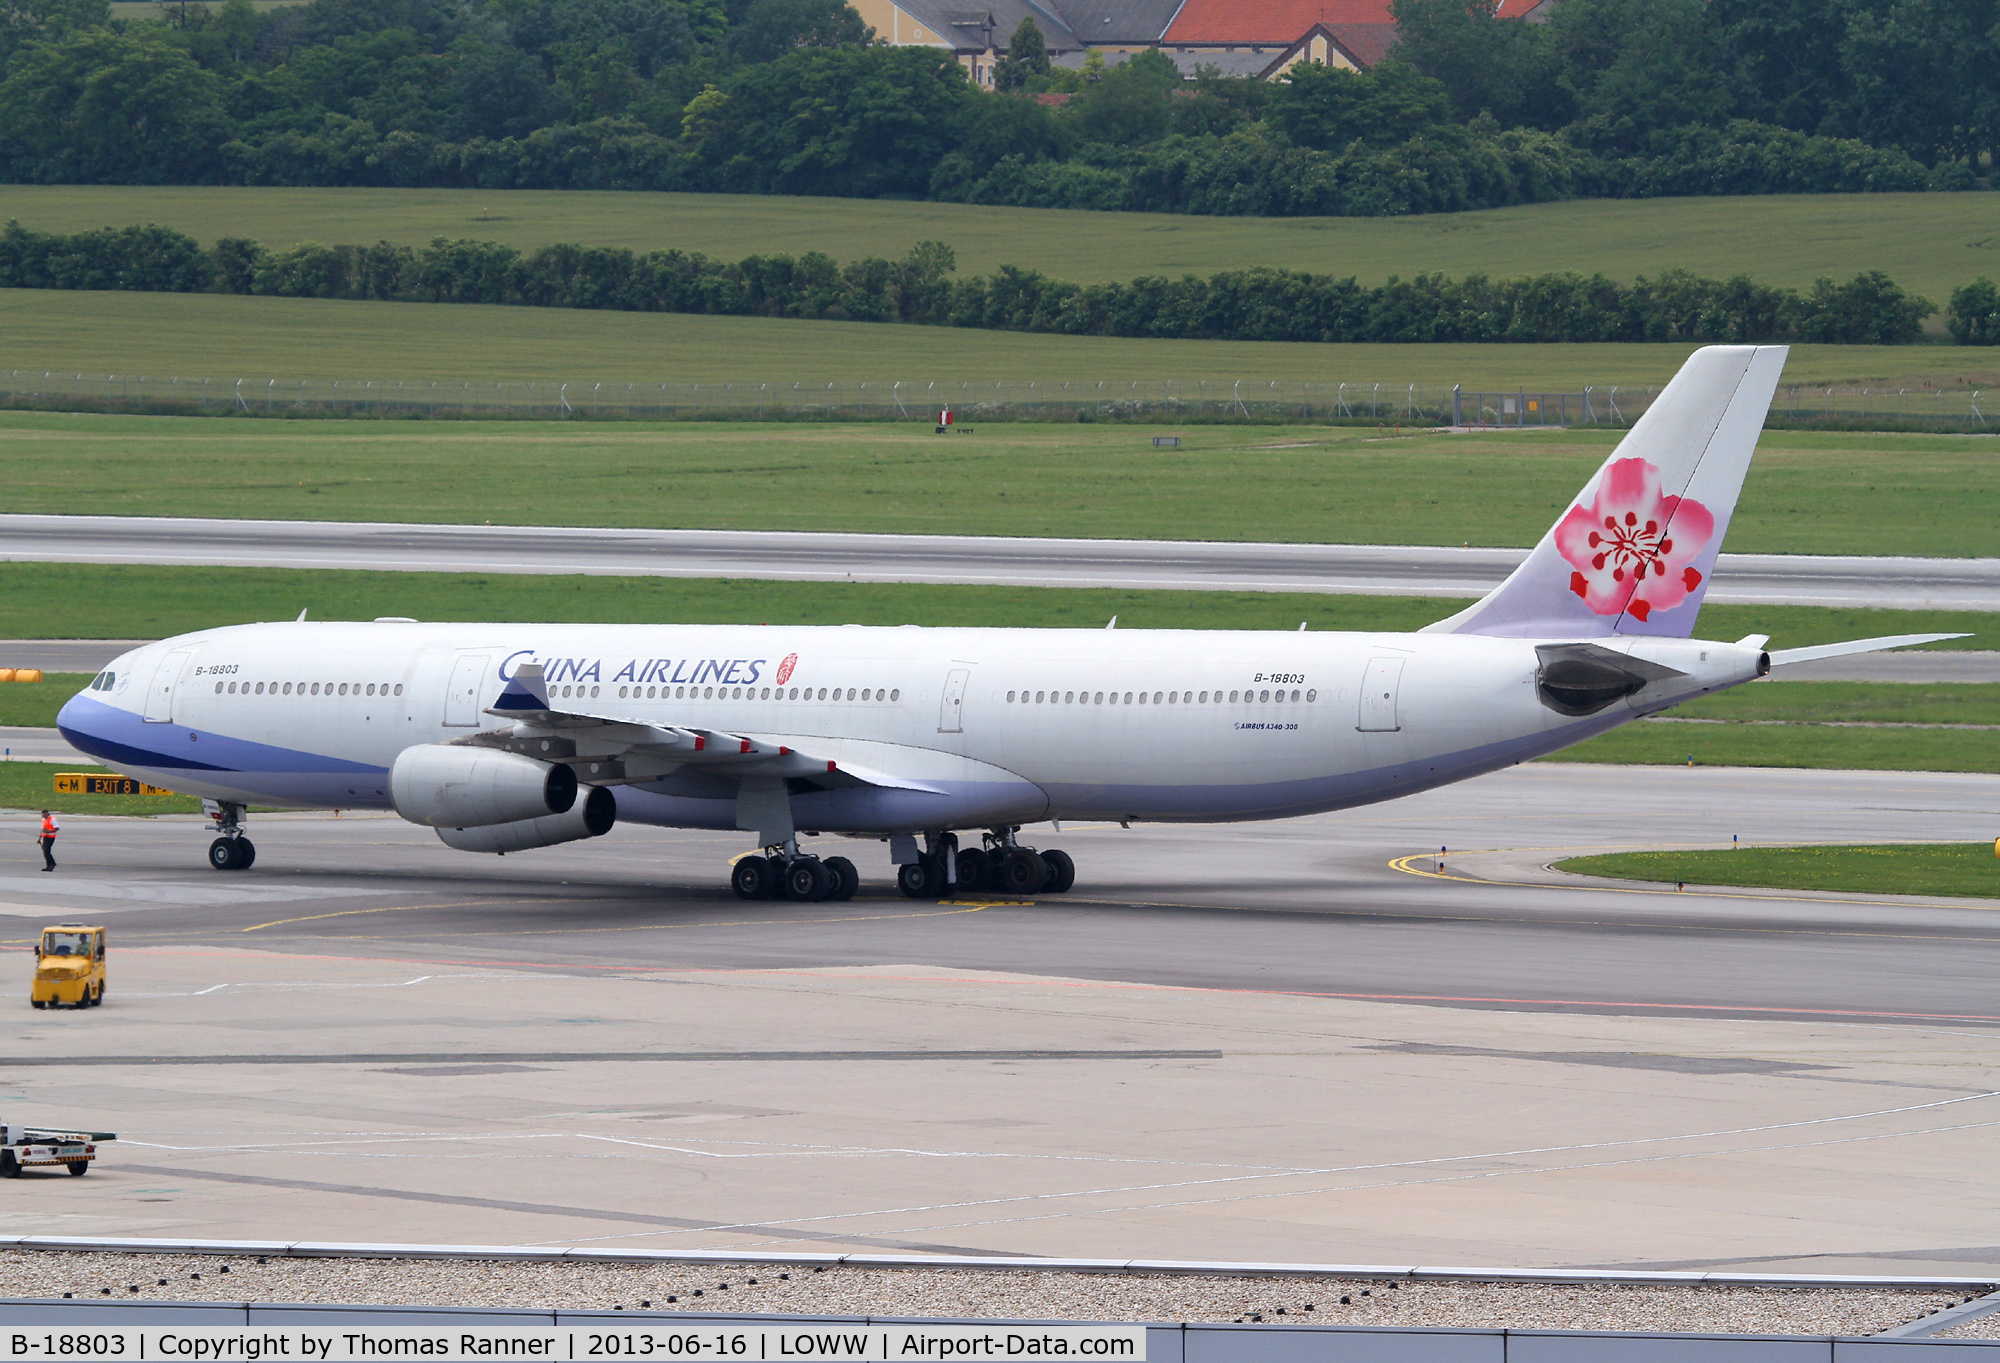 B-18803, 2001 Airbus A340-313 C/N 411, China Airlines Airbus A340